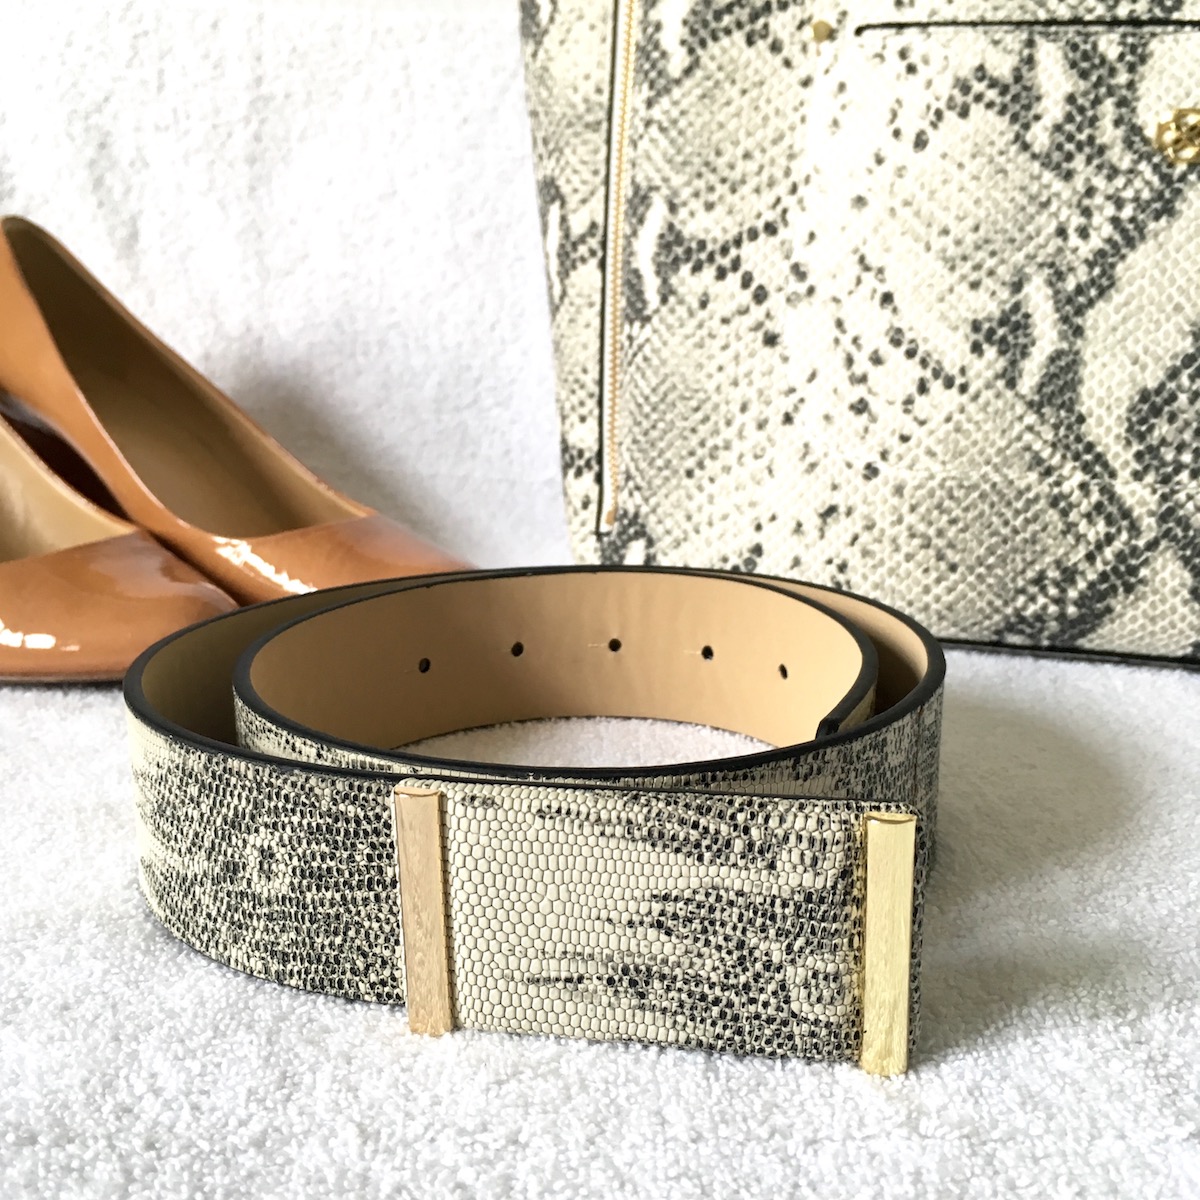 A snakeskin patterend belt in the front, with shoes and a matching bag in the background.